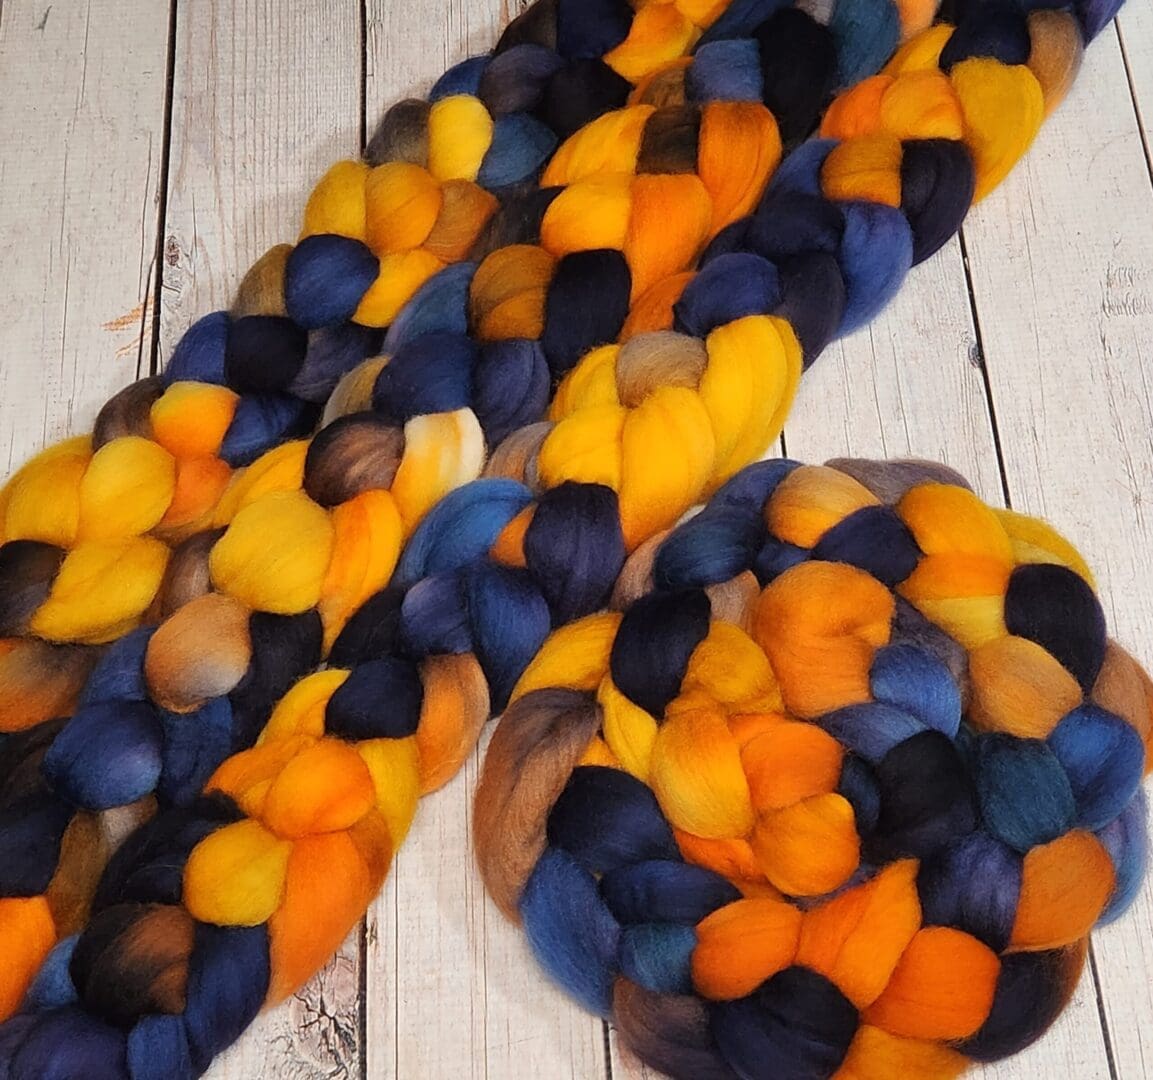 A blue, yellow and orange roving on a wooden table.